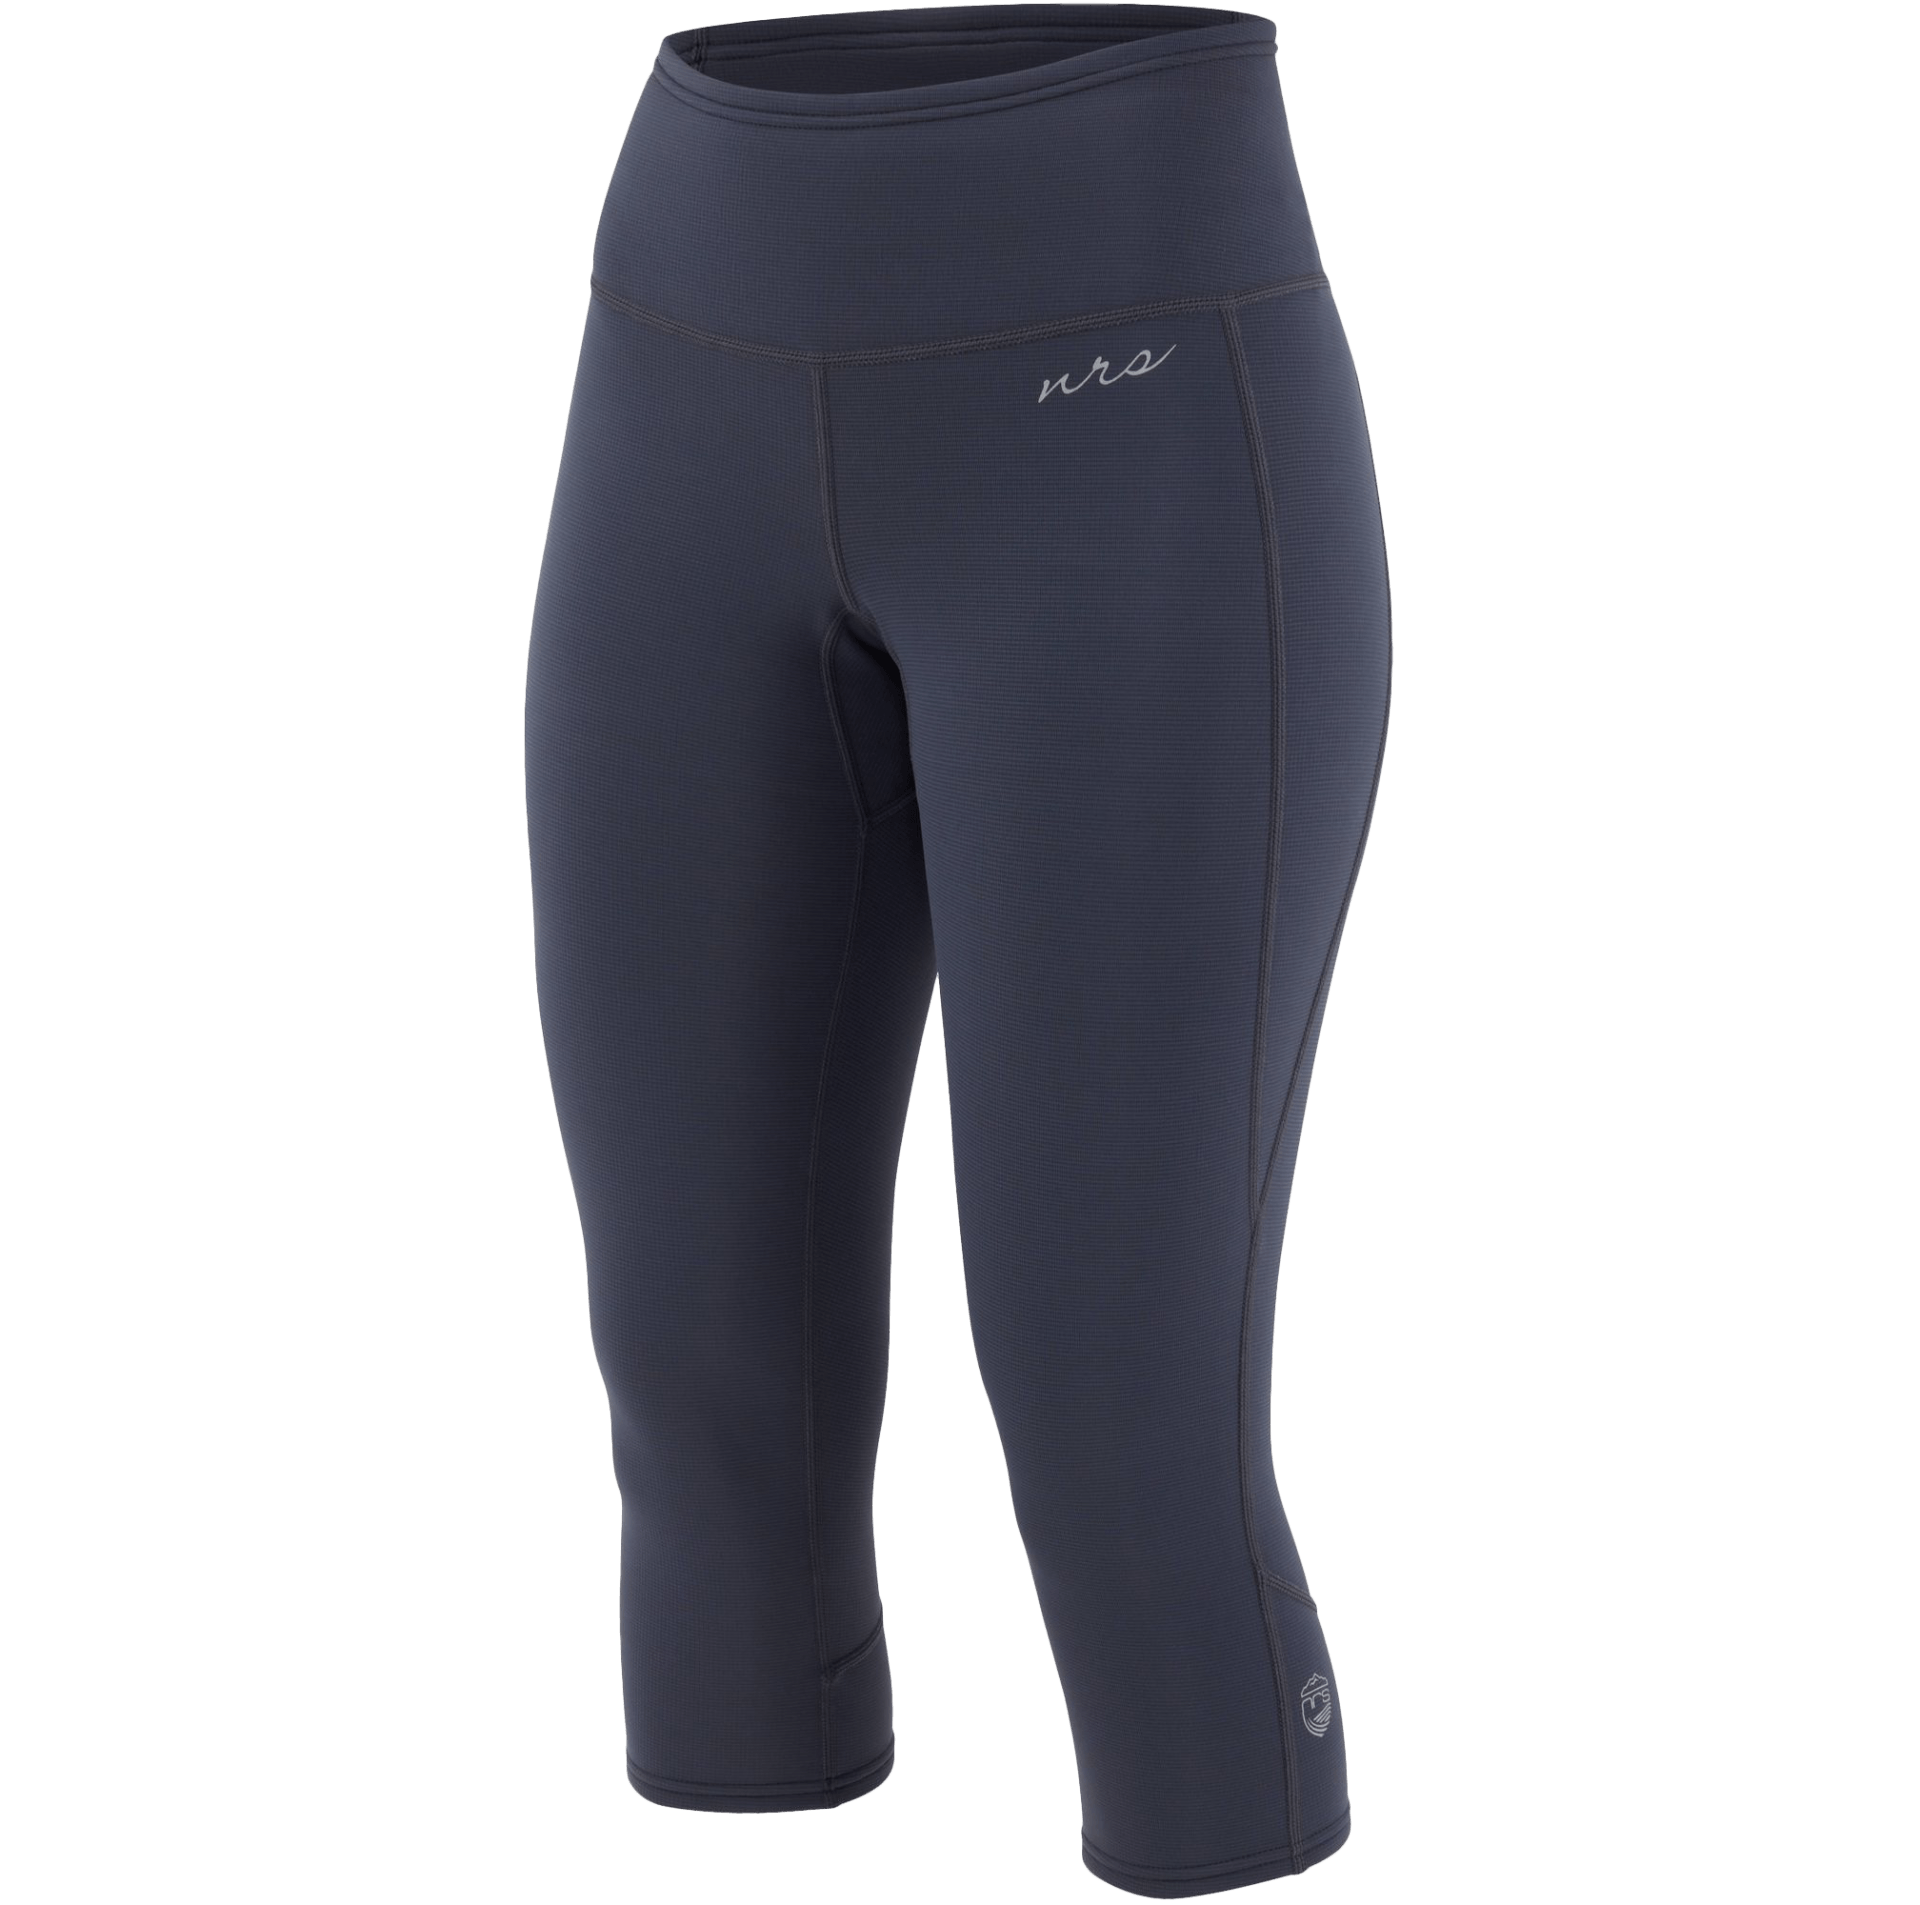 nrs_womens_hydroskin_05mm_capris_left_angle.png